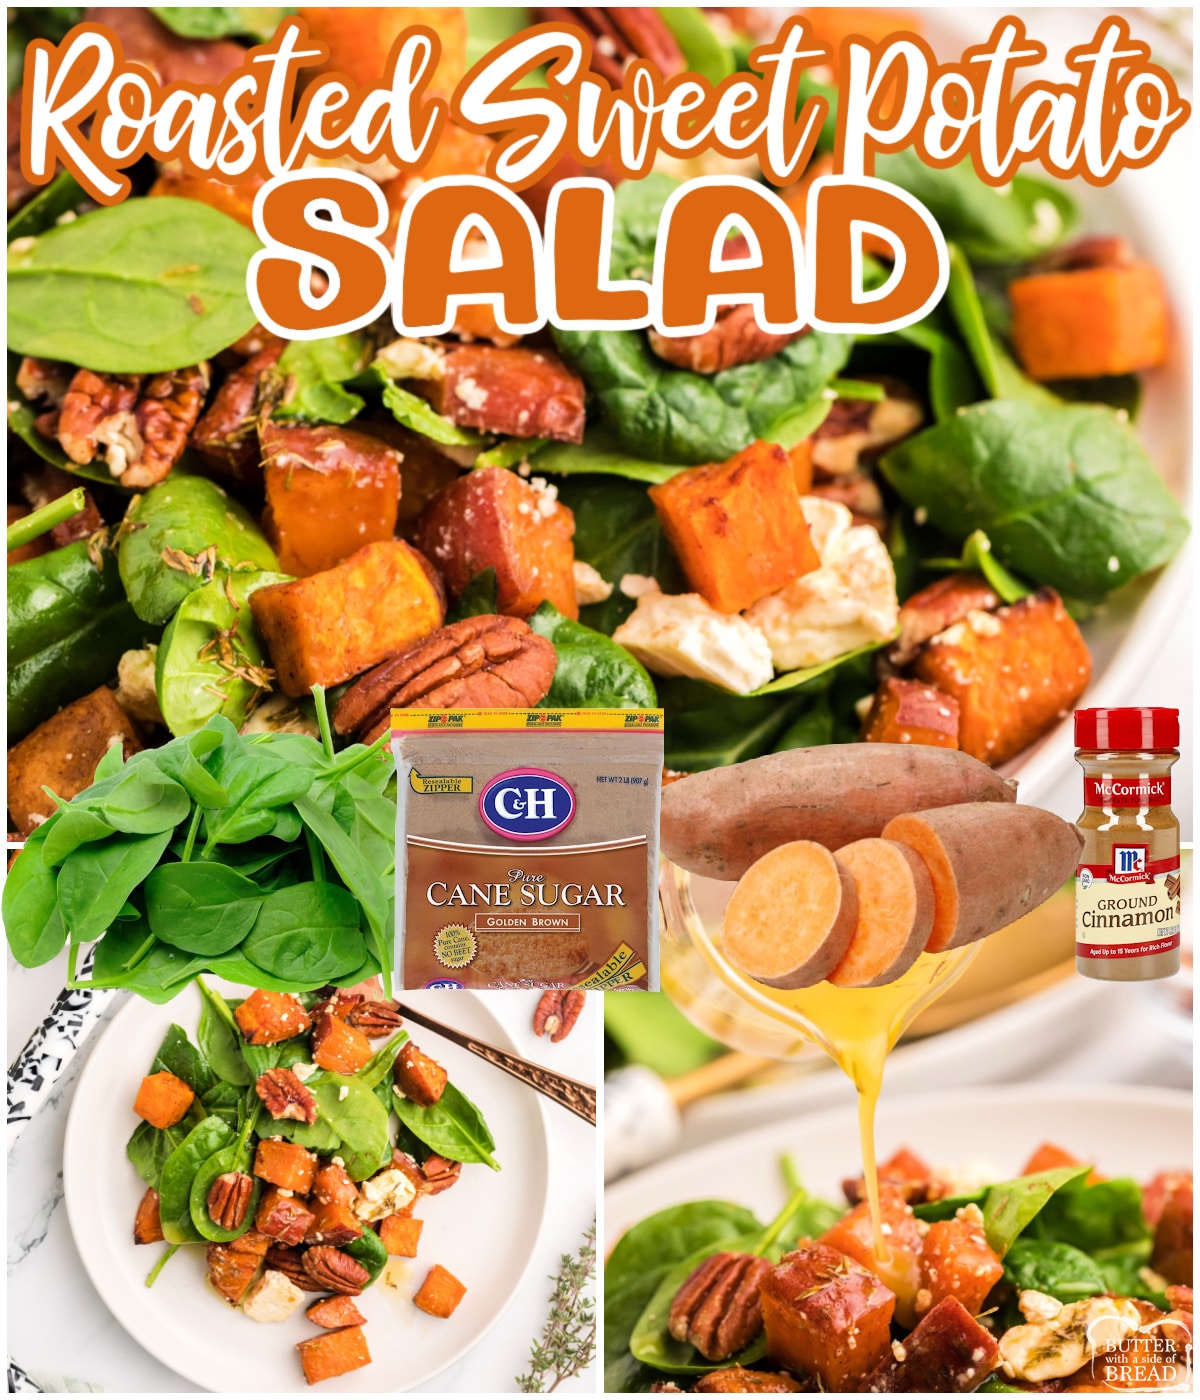 Roasted Sweet Potato Salad is made with sweet potatoes that have been coated in cinnamon and brown sugar and then roasted to perfection. This delicious salad recipe is simple enough to enjoy regularly, and fancy enough to serve at an elegant dinner! 